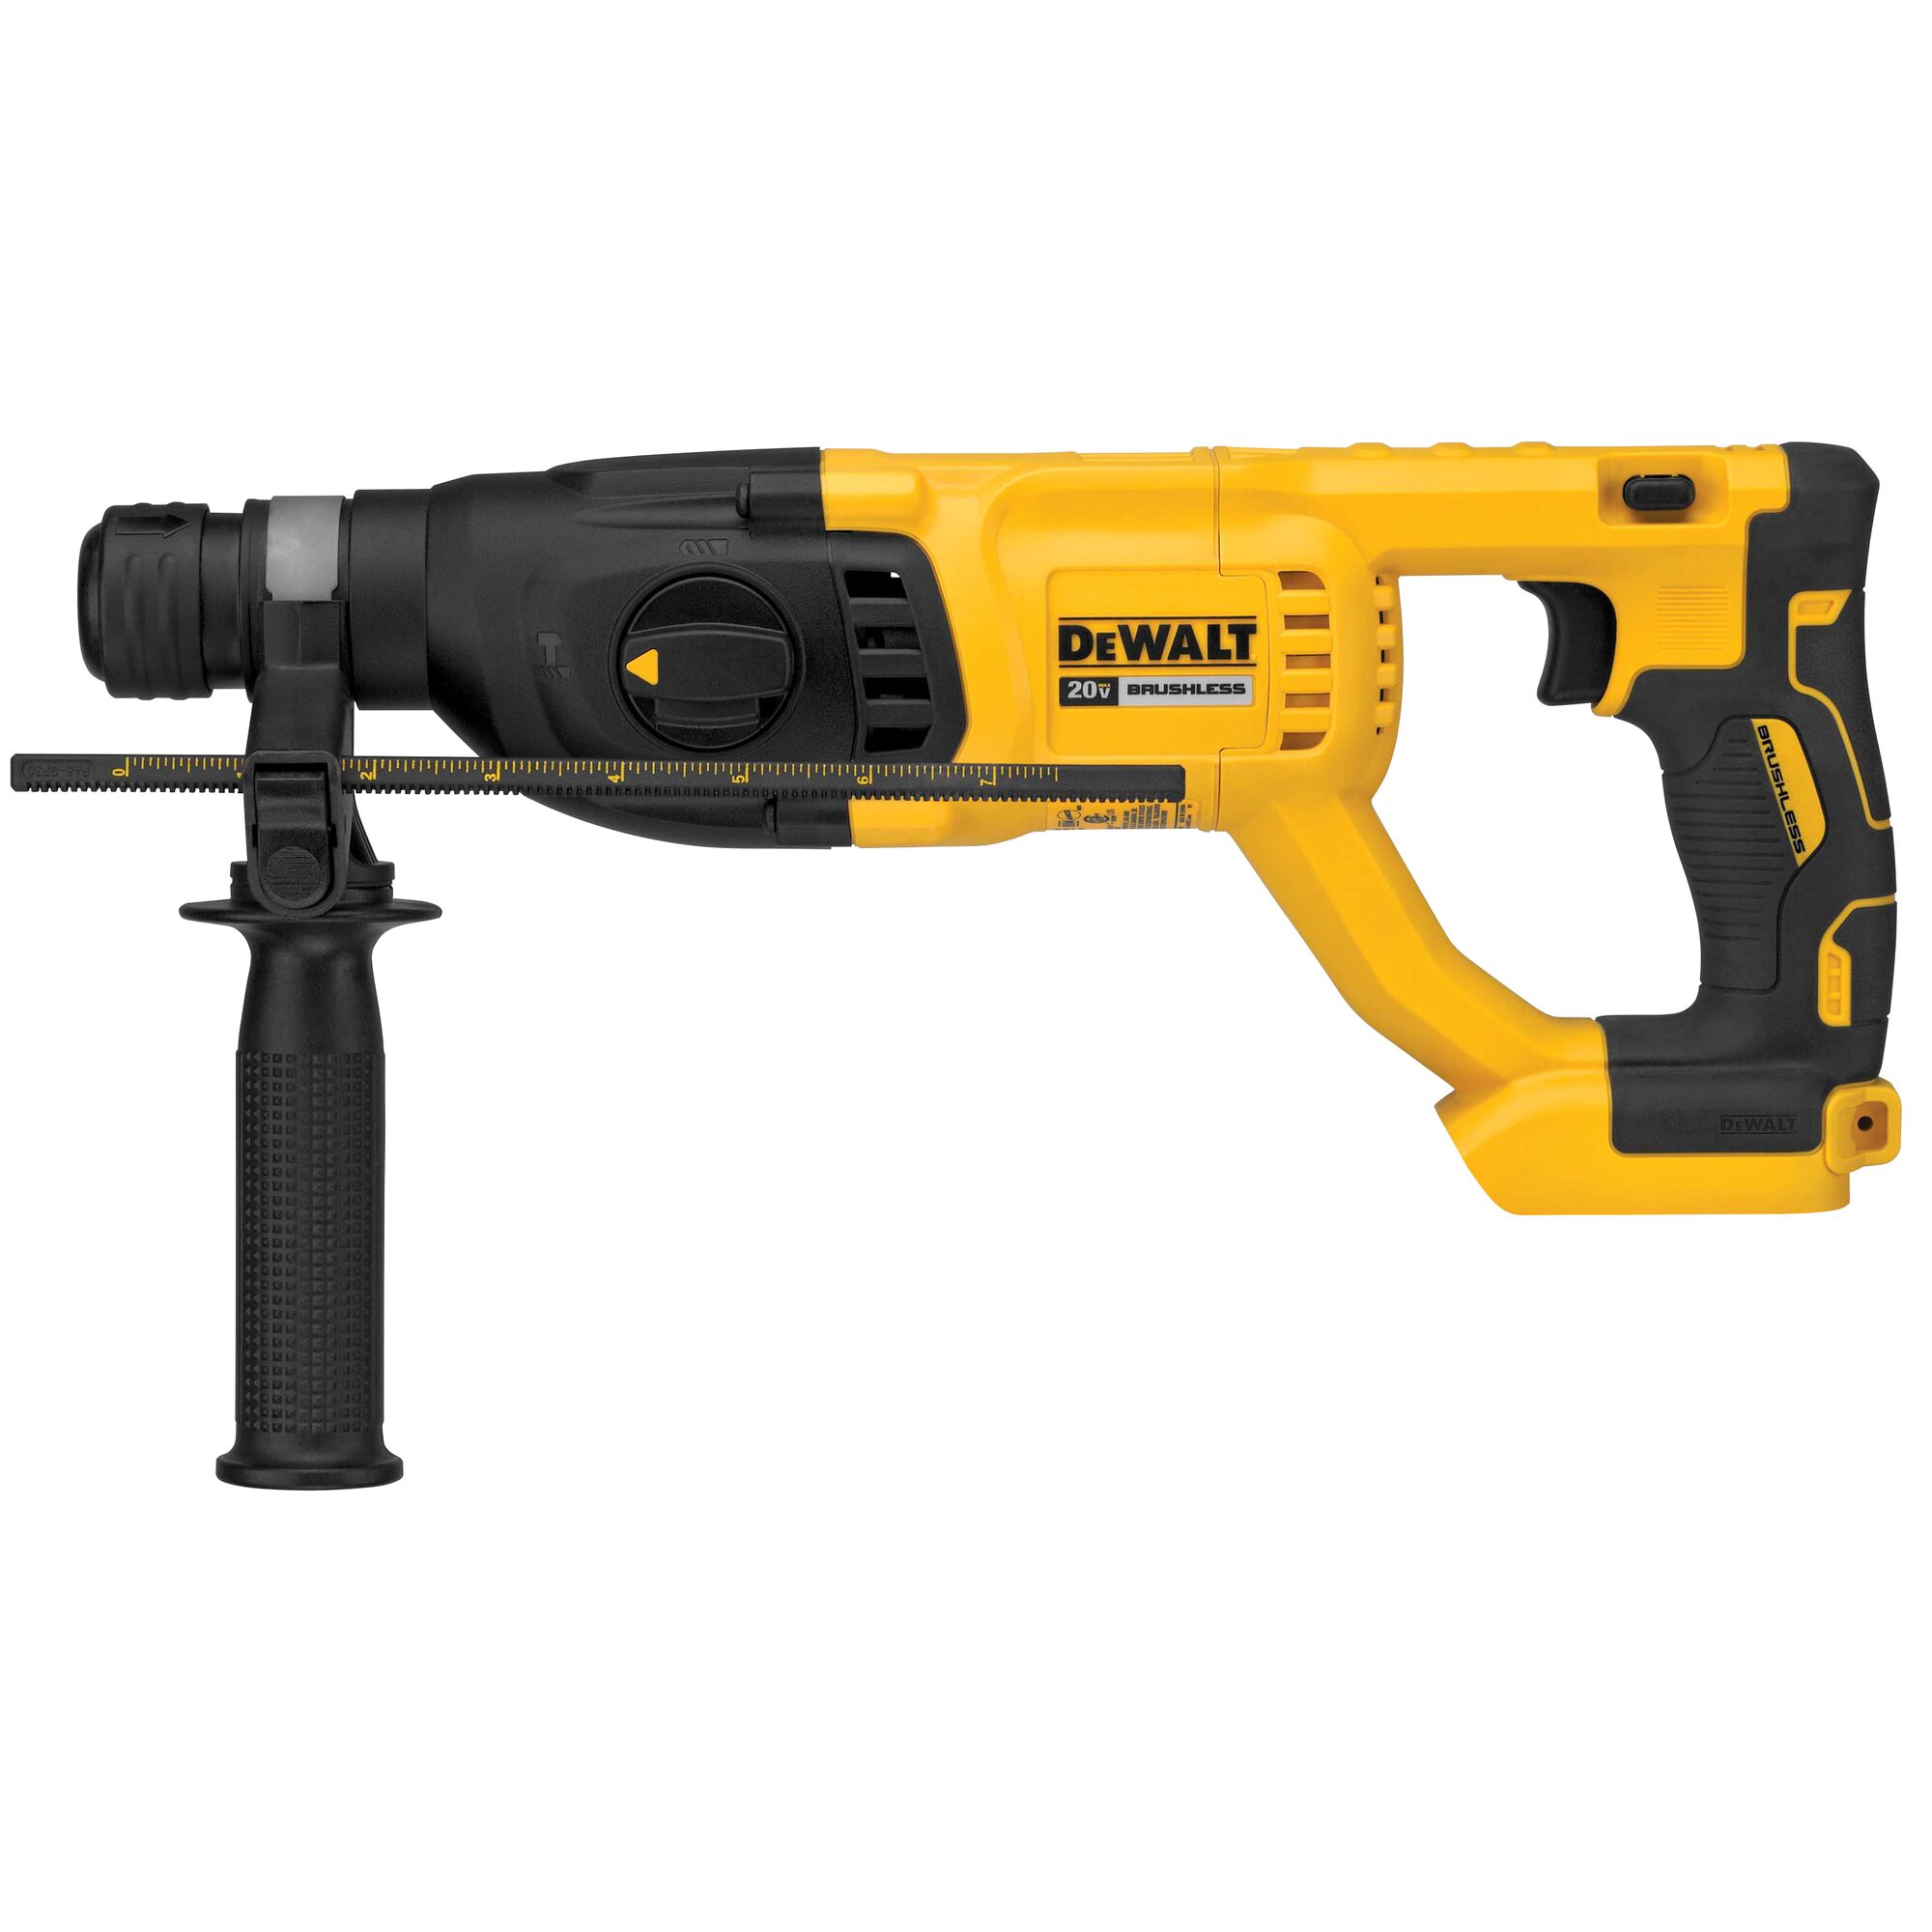 DEWALT XR 20-volt Max-Amp 1-in Sds-plus Variable Speed Cordless Rotary Hammer Drill in Yellow | DCH133B